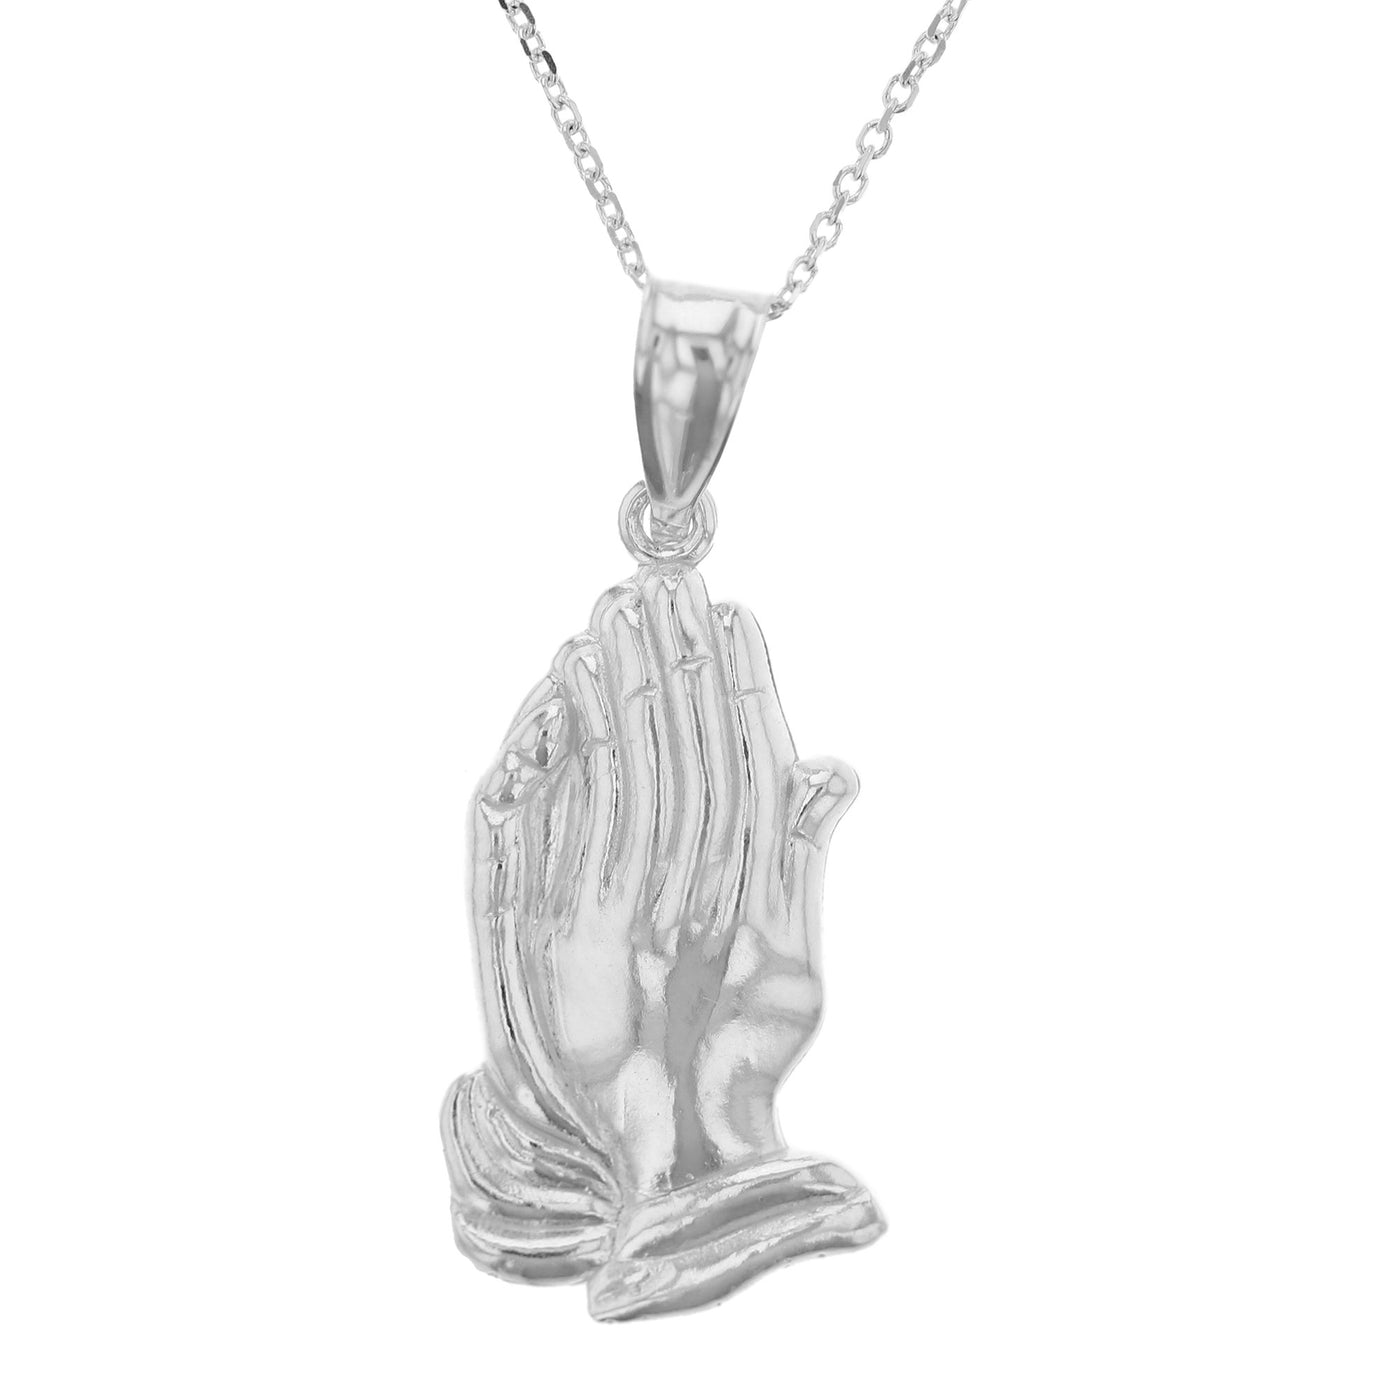 Rebecca Sloane Sterling Silver Praying hands Necklace